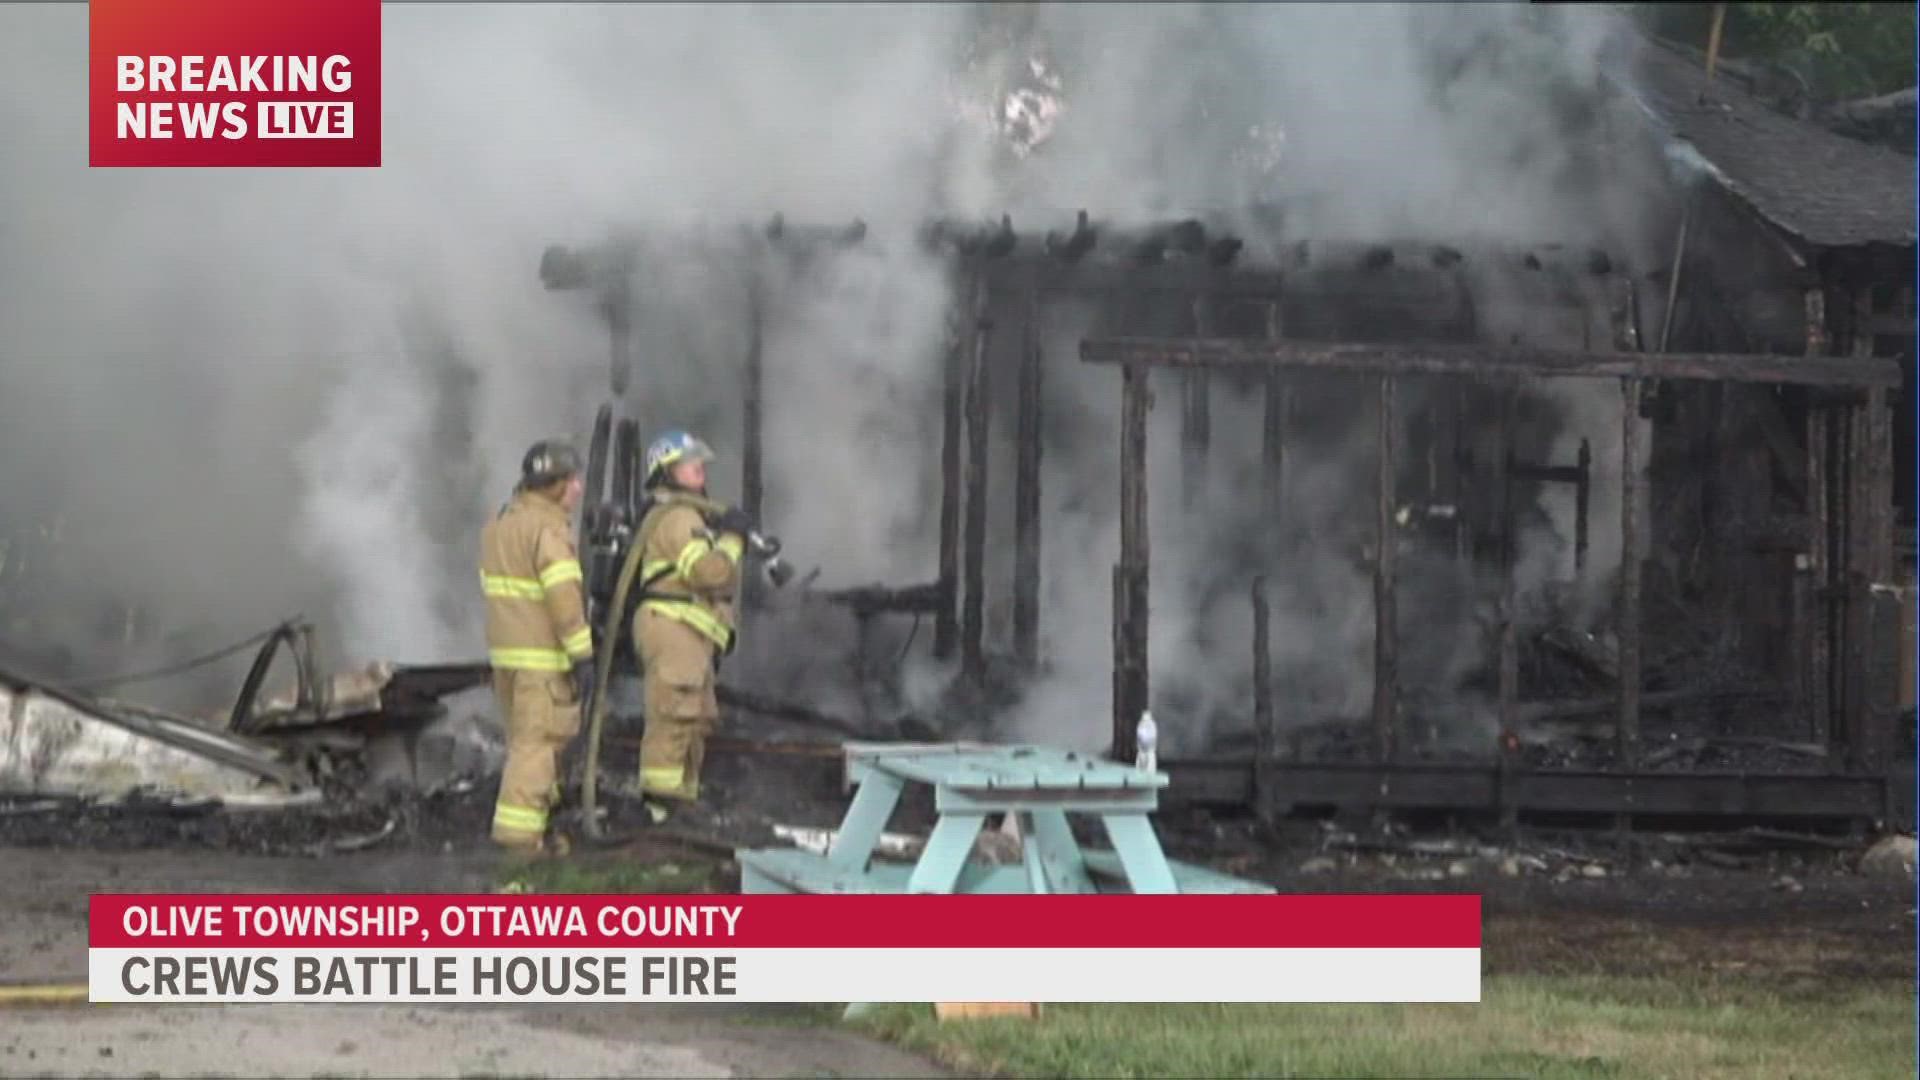 No one was injured in the fire. Records show the home is also an active childcare facility.